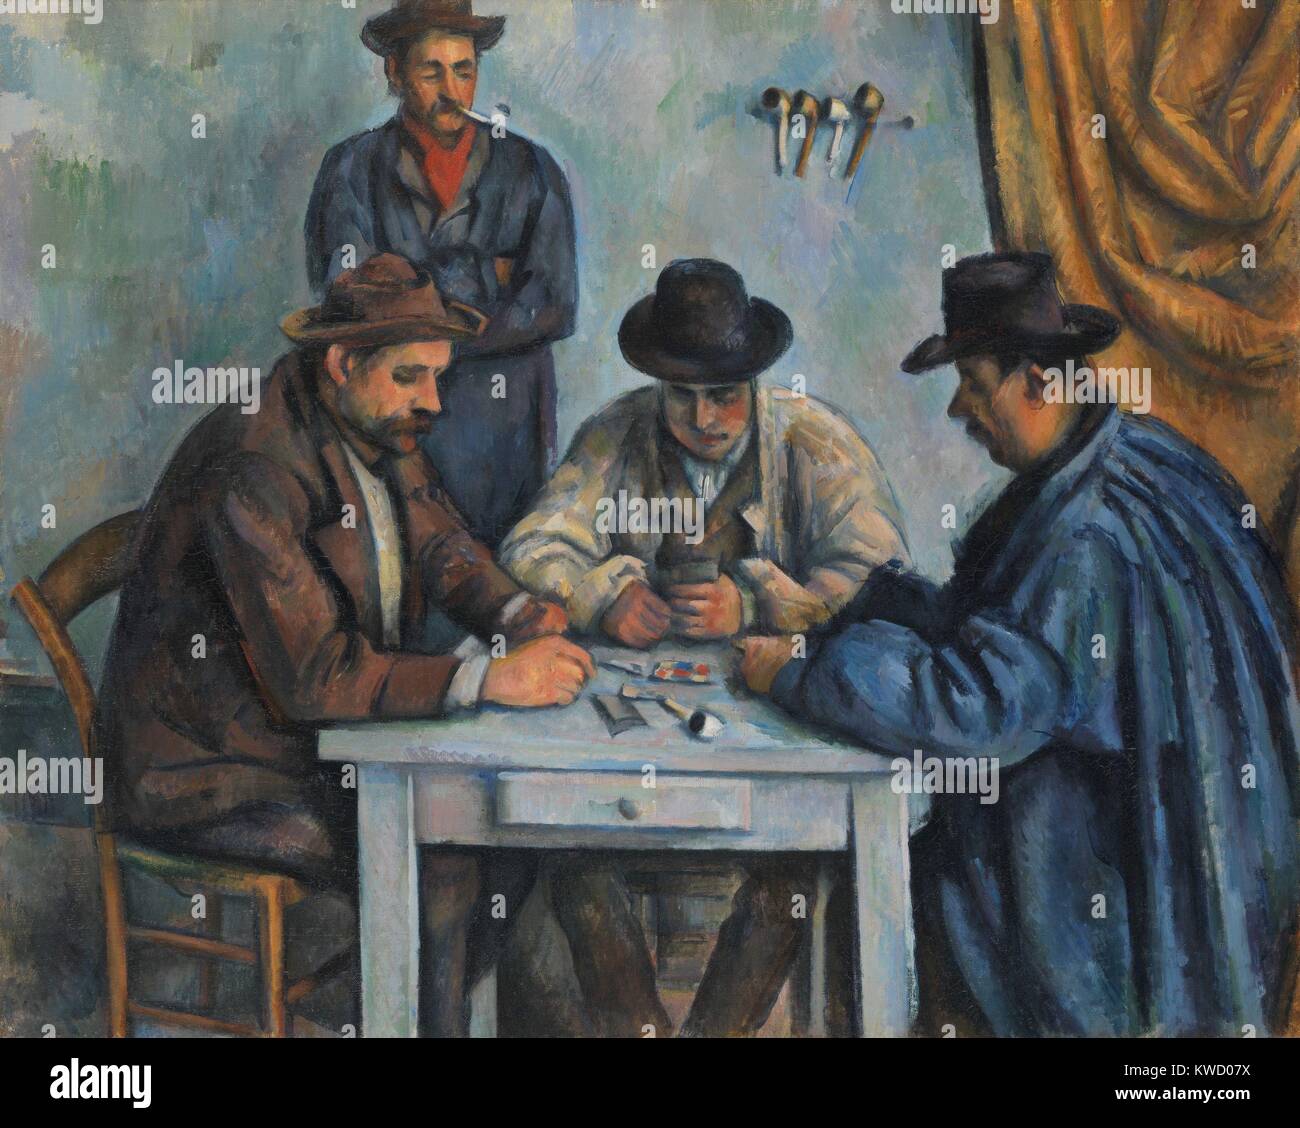 The Card Players, by Paul Cezanne, 1890-92, French Post-Impressionist painting, oil on canvas. This is believed to be the first of five paintings Cezanne made of peasants playing cards (BSLOC 2017 5 19) Stock Photo